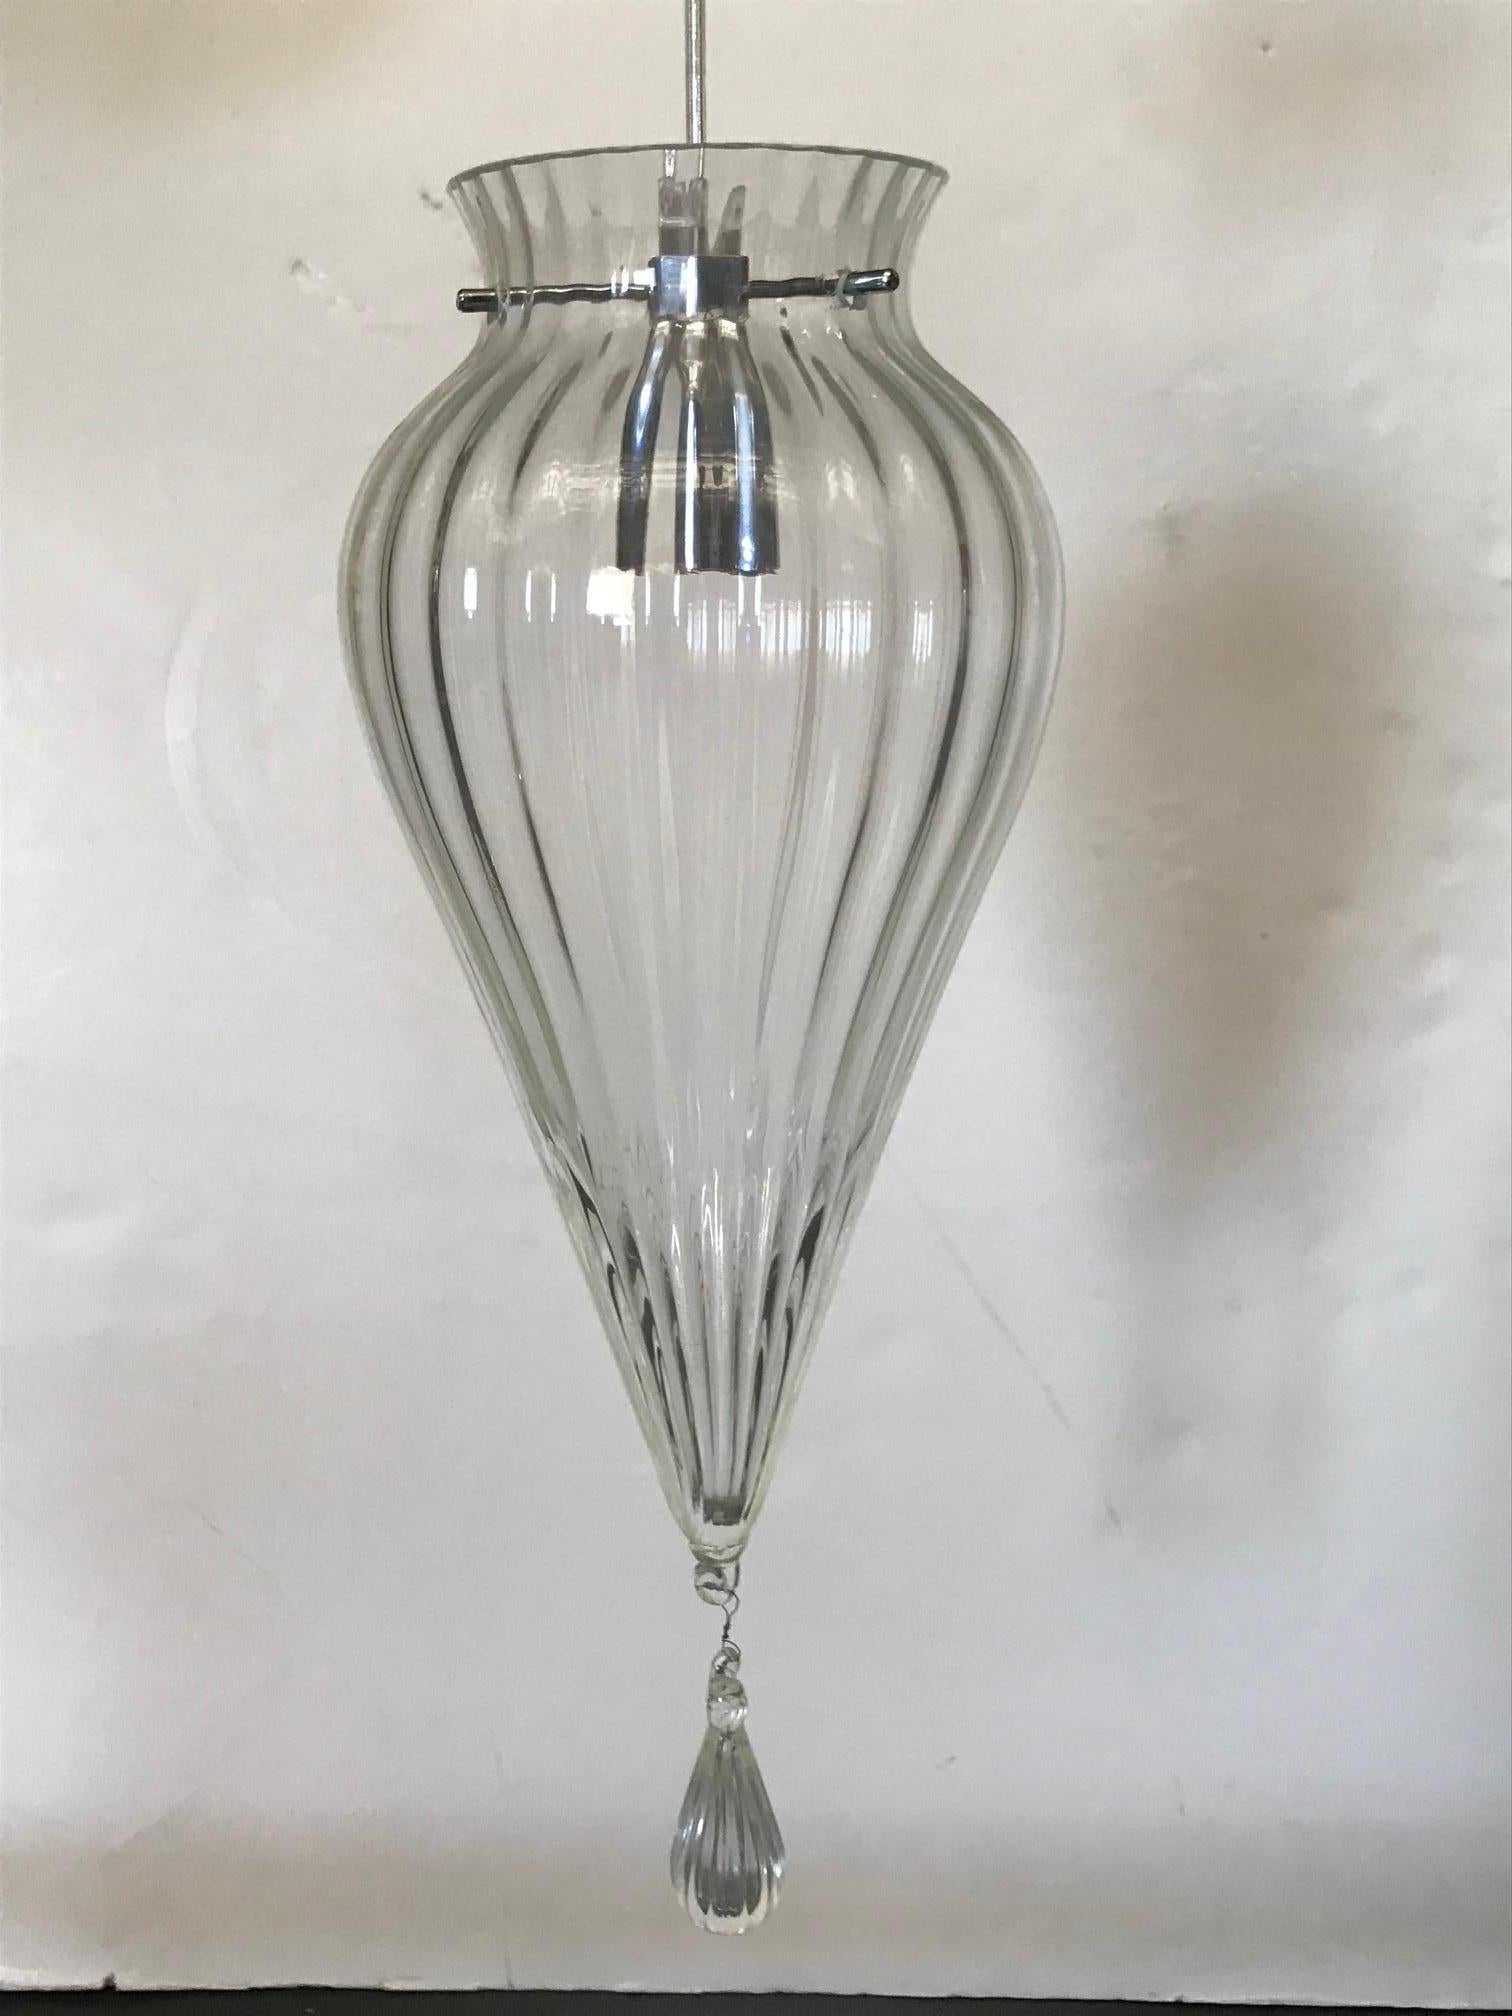 Vintage Italian teardrop pendant with hand blown clear Murano glass, mounted on chrome hardware / Made in Italy circa 1960’s
1 light / G9 type / max 60W 
Height: 18 inches plus chain and canopy / Diameter: 7.5 inches 
1 in stock in Palm Springs